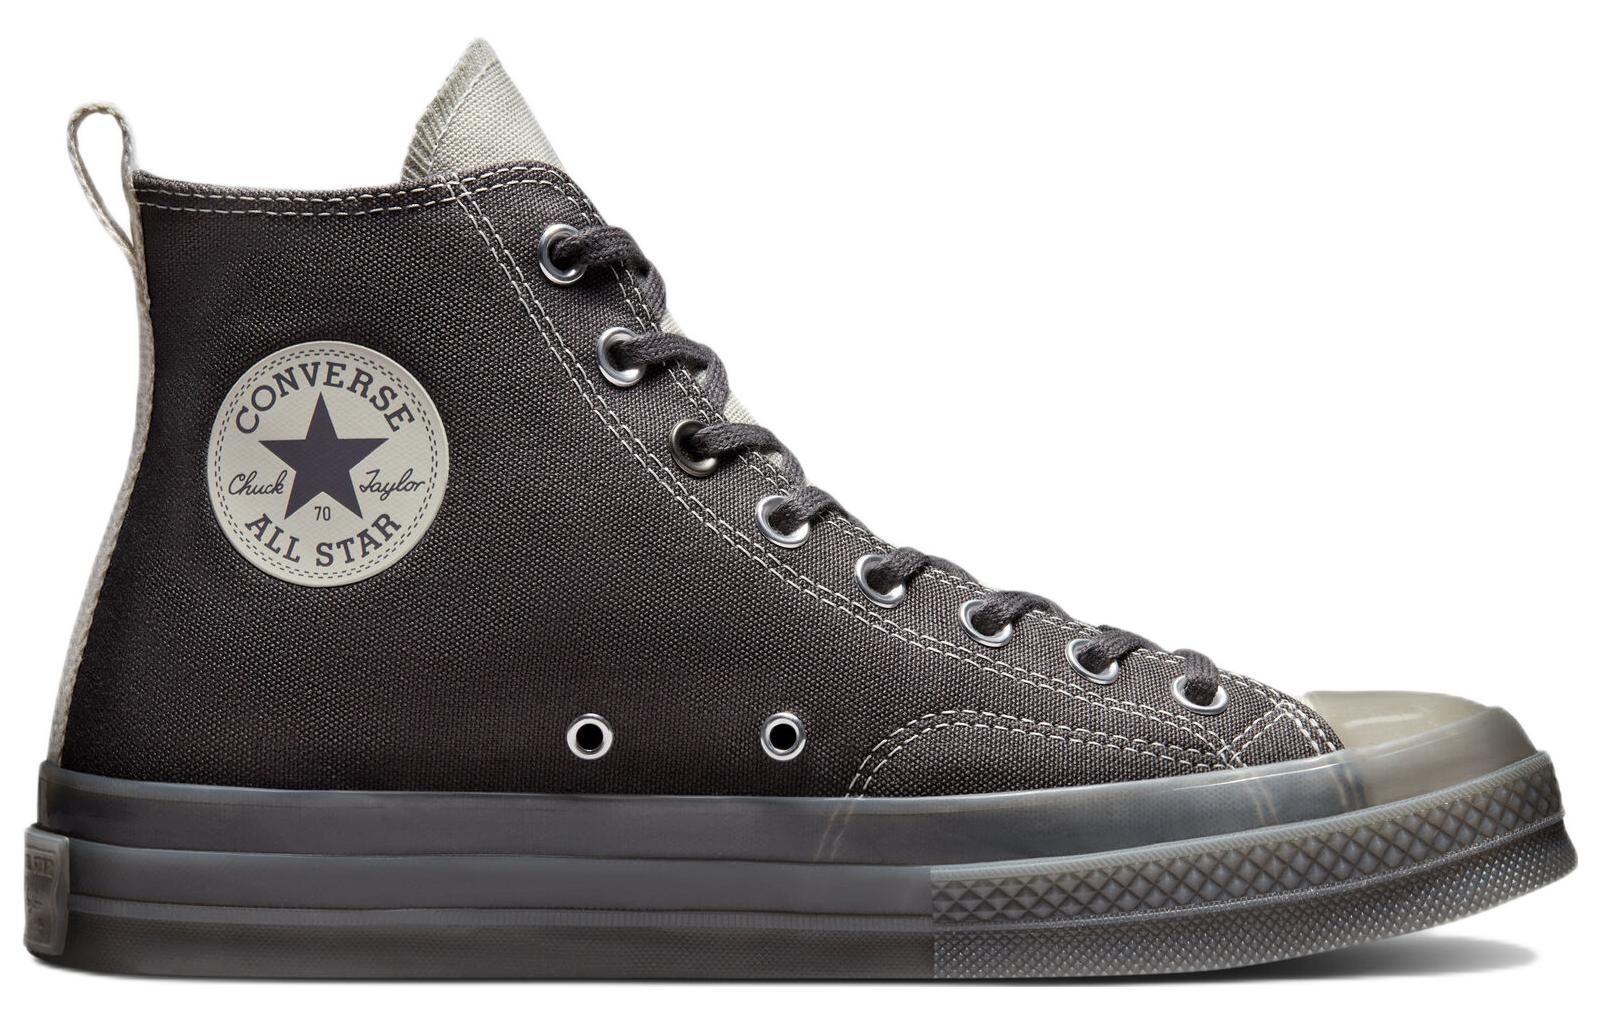 A-COLD-WALL* x Converse Chuck Taylor All Star 1970s